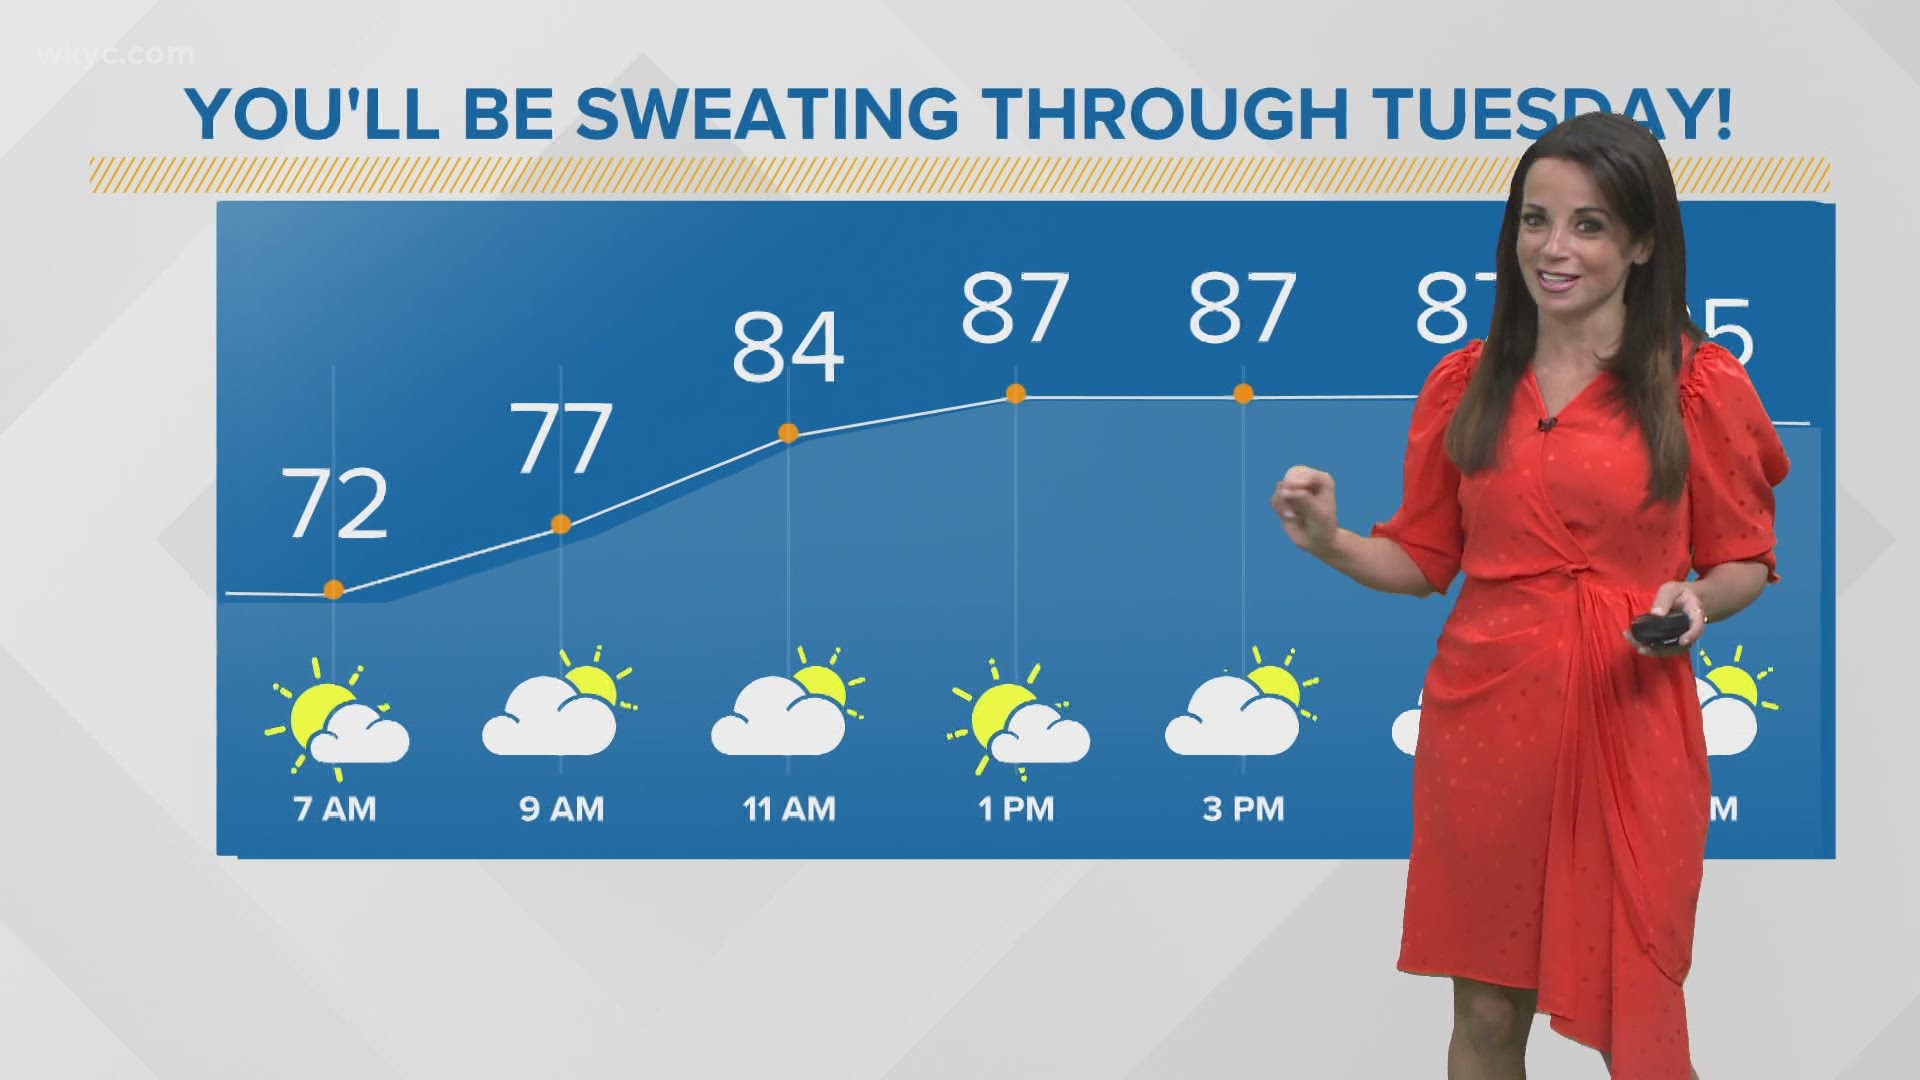 We'll be approaching 90 degrees throughout Northeast Ohio. Hollie Strano has the hour-by-hour details in her morning weather forecast for May 25, 2021.